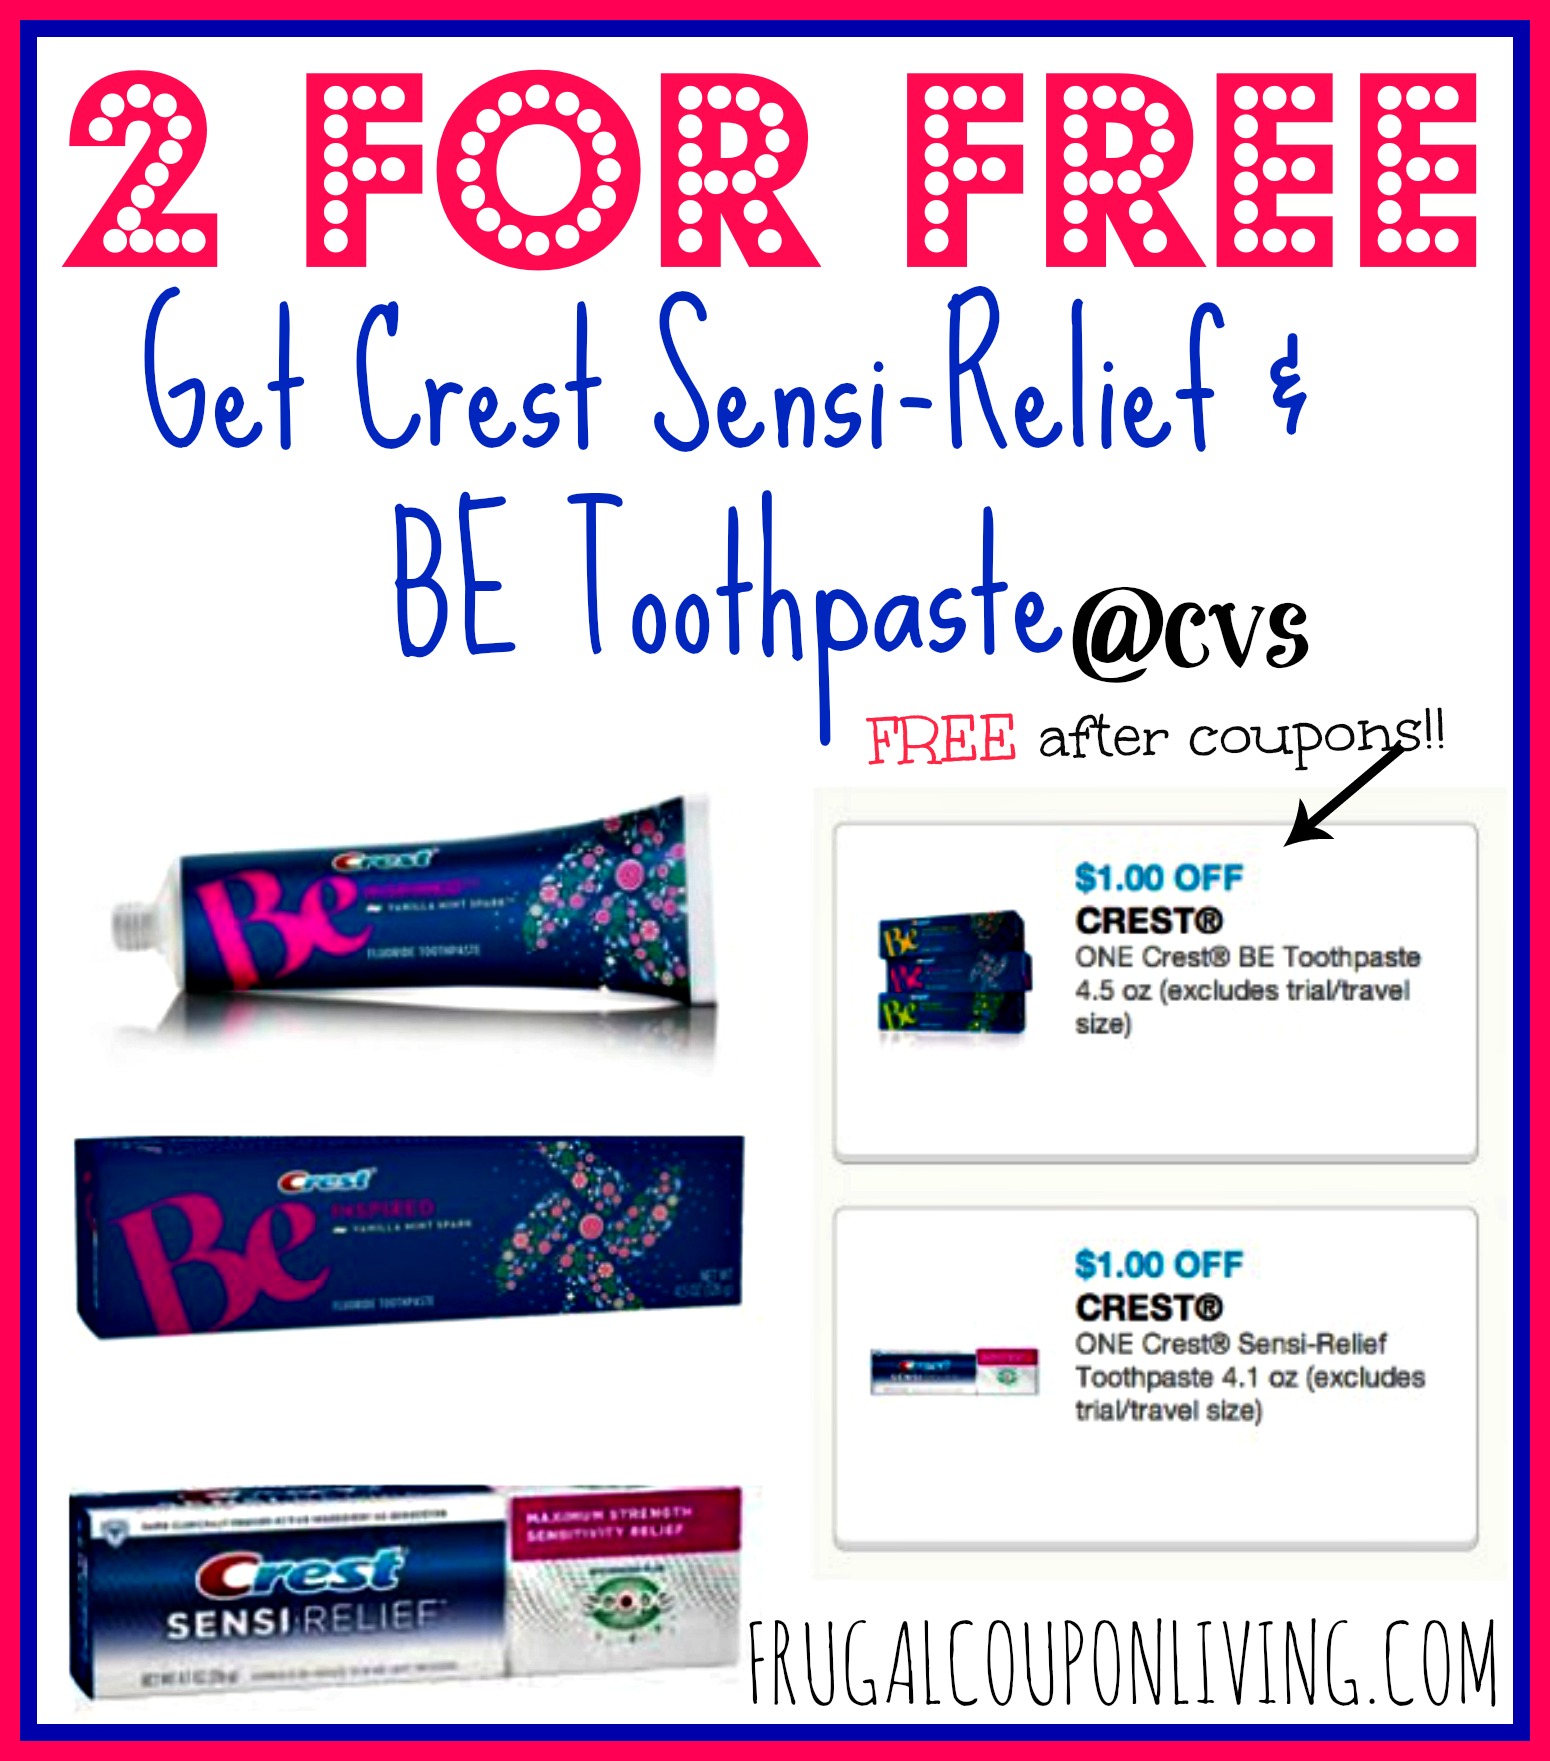 FREE Crest SensiRelief and FREE BE Toothpastes with Printable Coupons